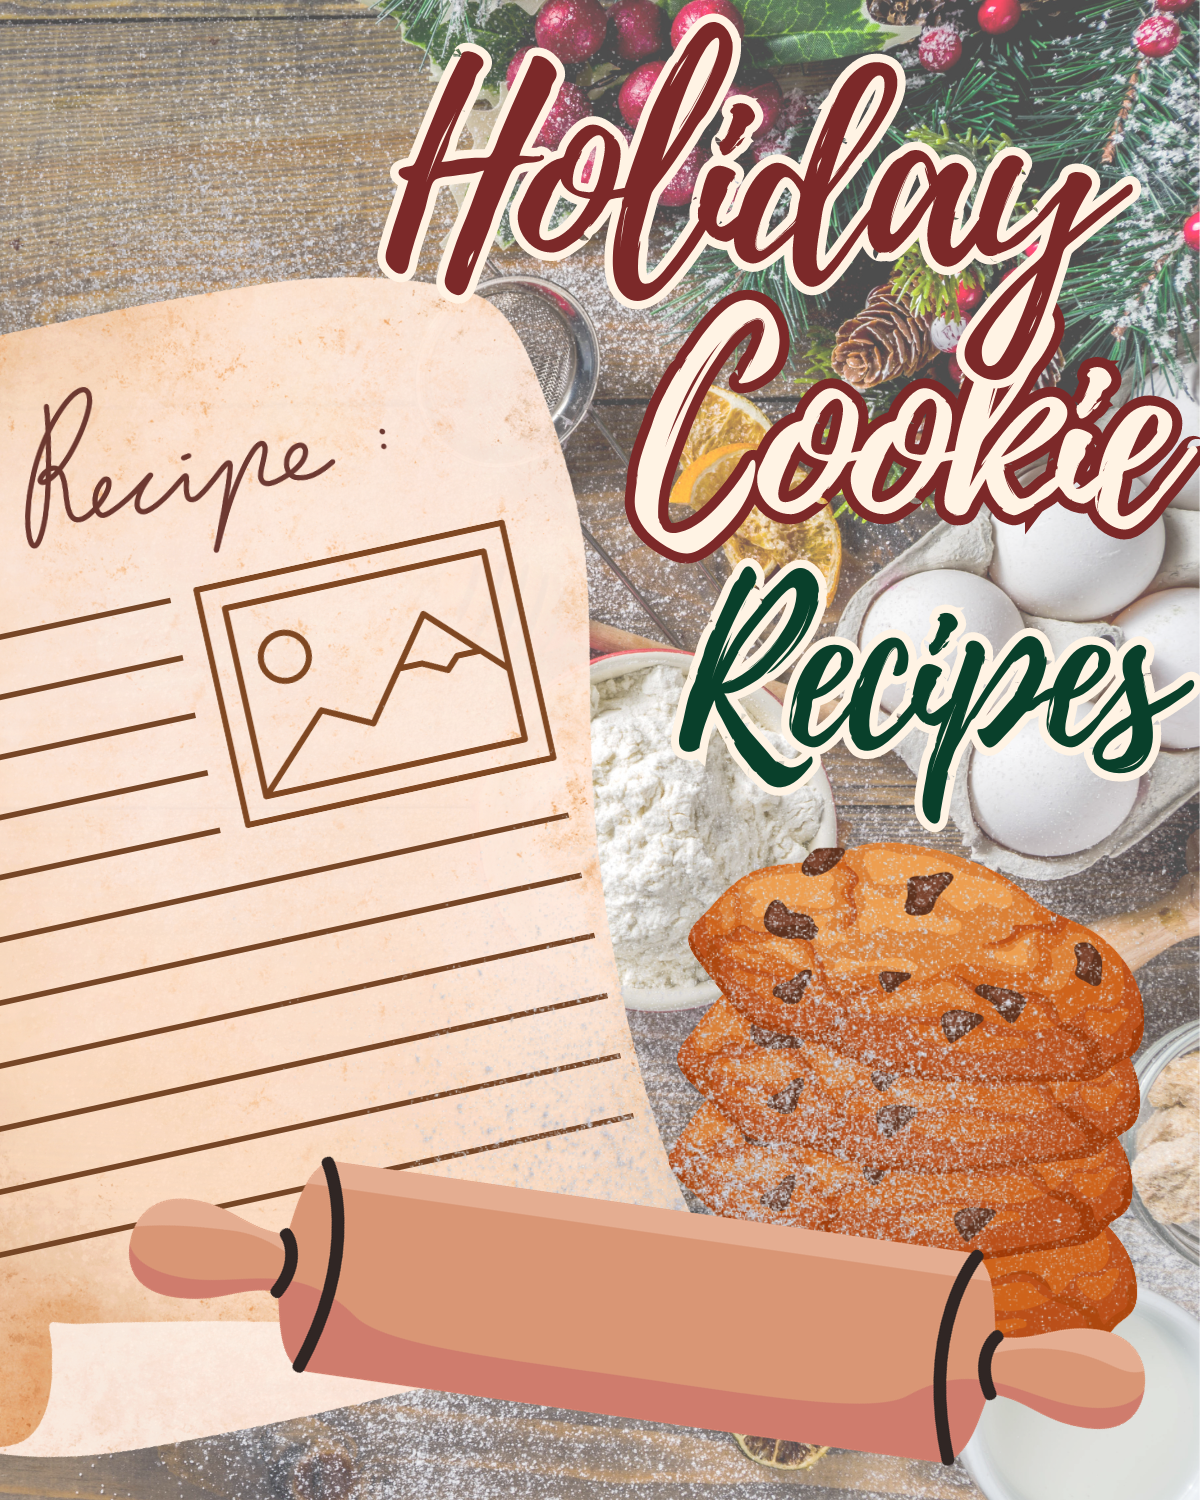 A recipe sheet with cookies and a rolling pin